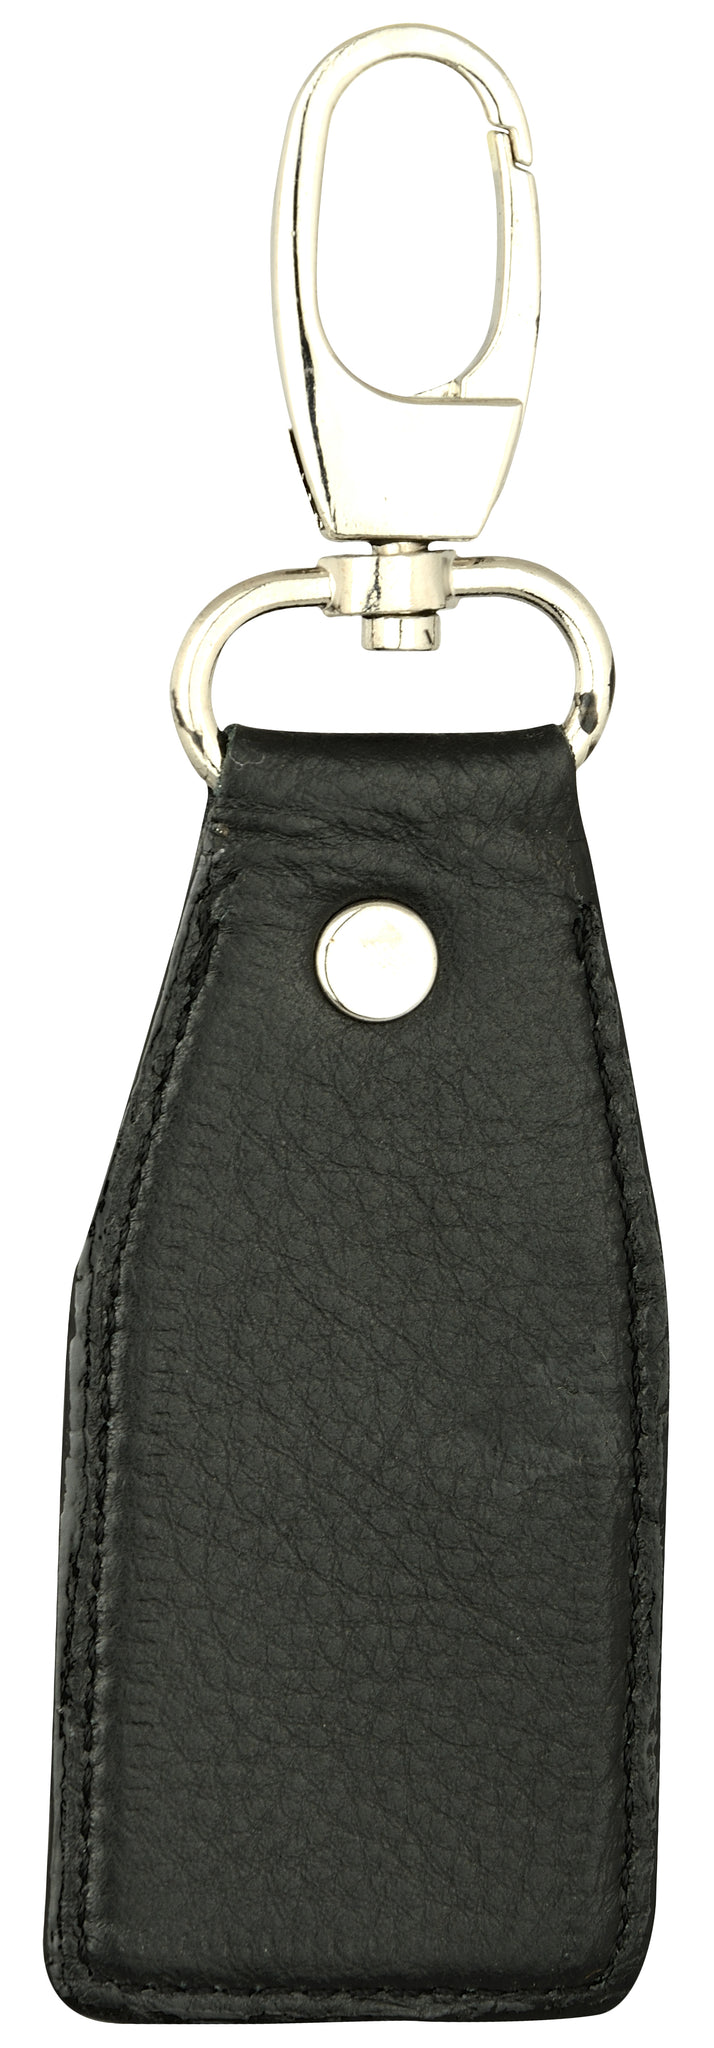 Solid black leather key chain